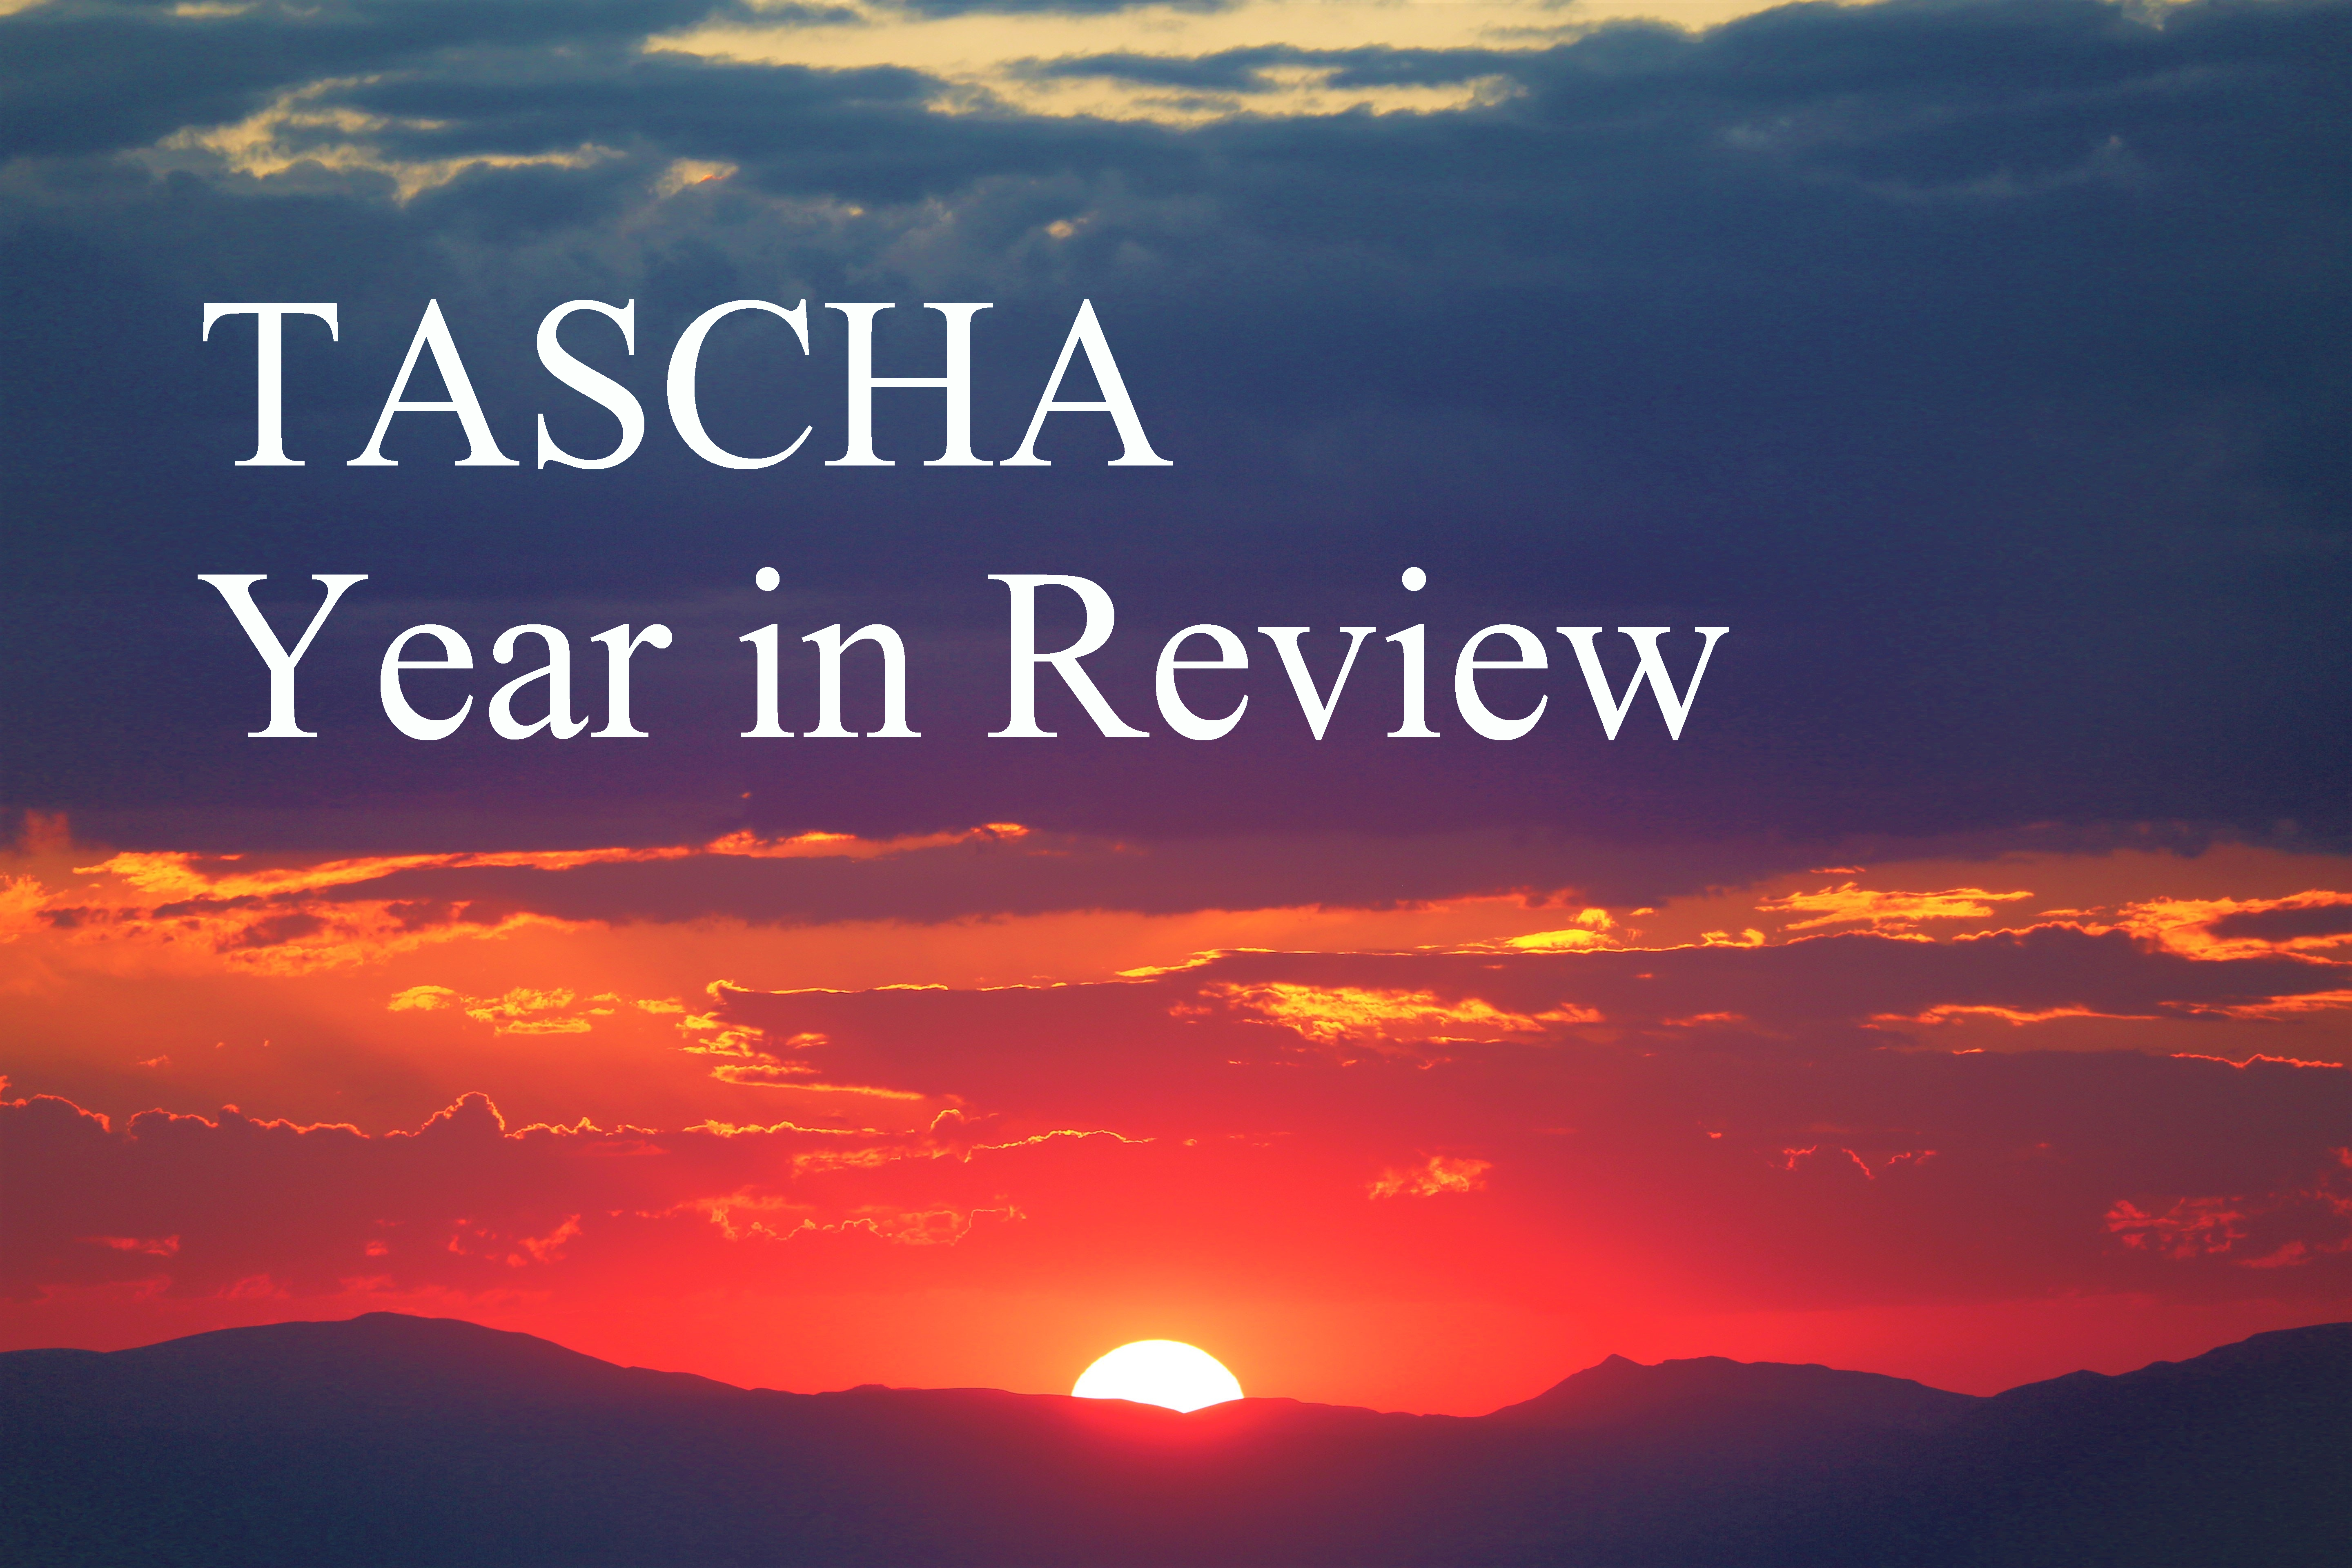 The words "TASCHA Year in Review" written in a white font over an image of a red and purple sunset